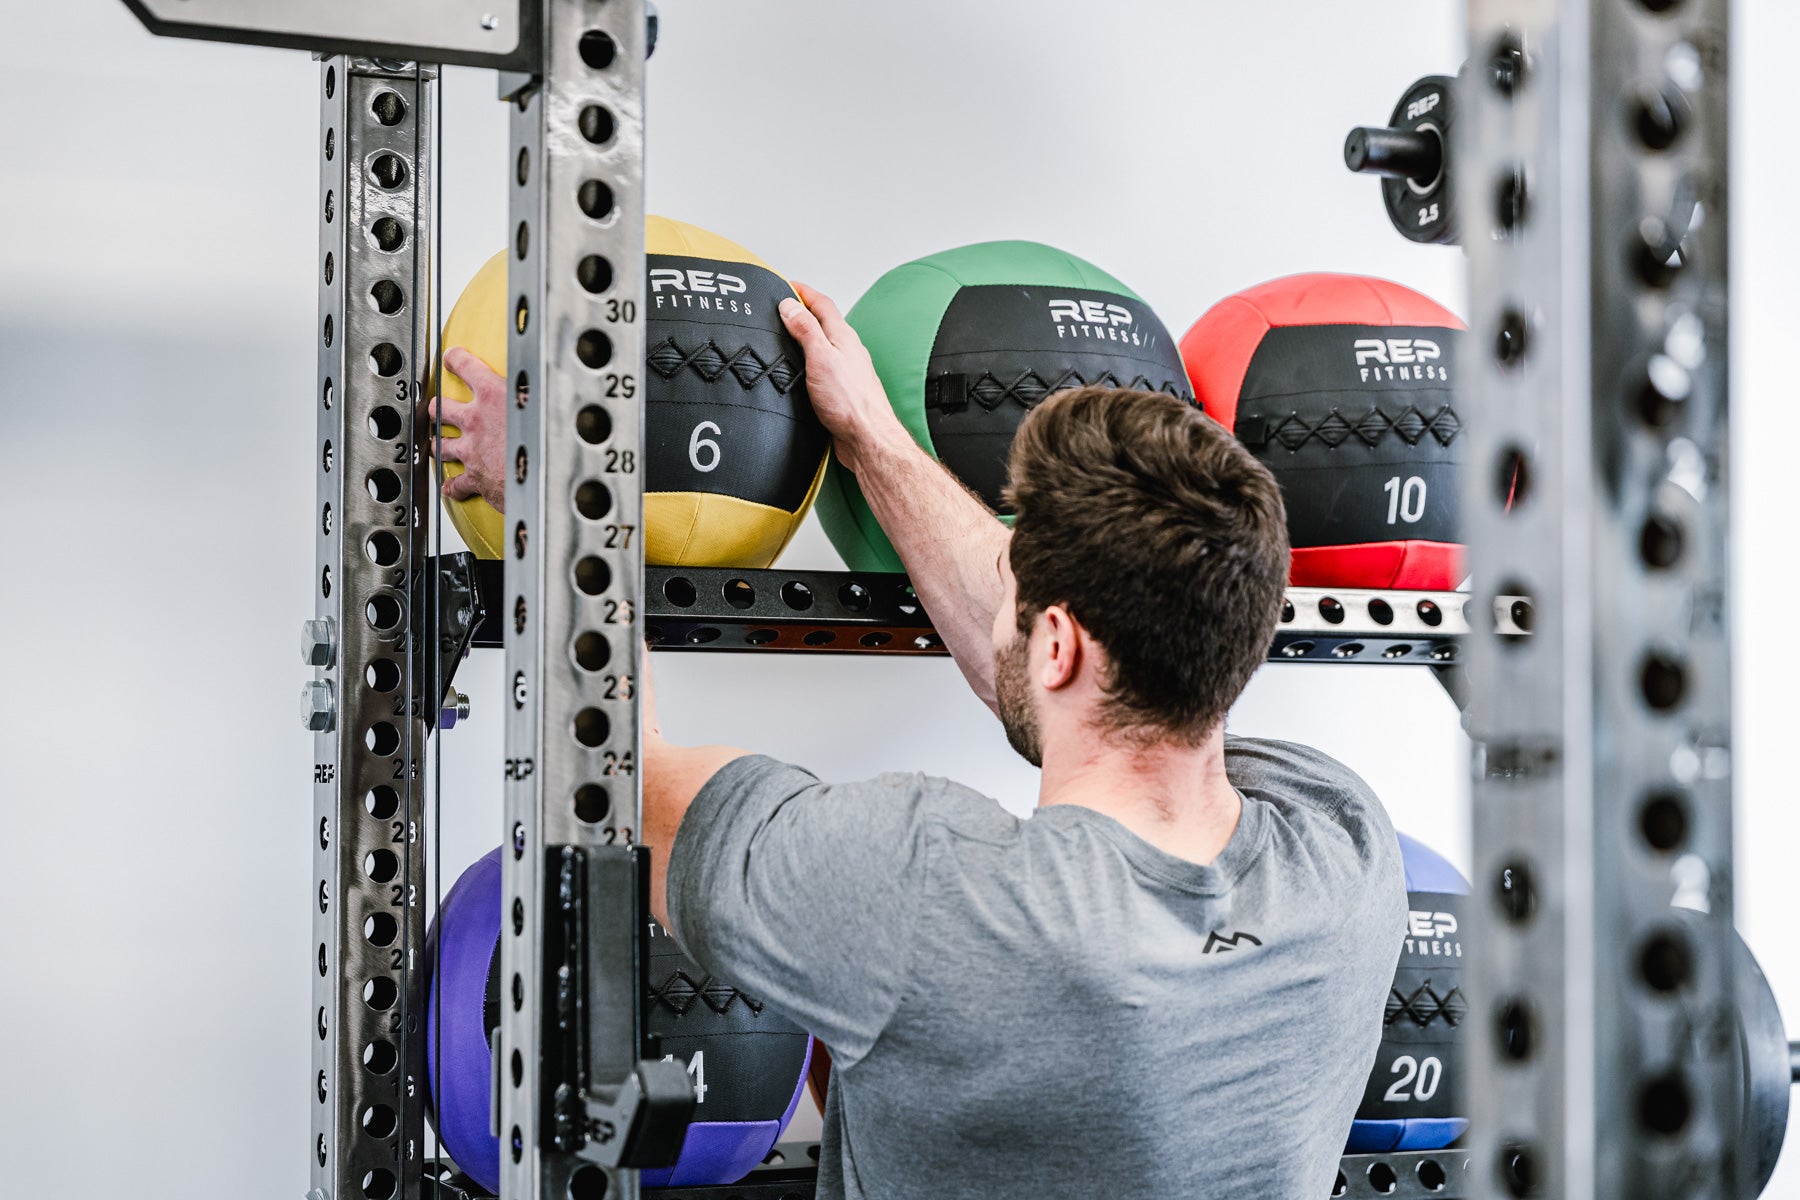 Off-Rack Storage - Showing someone grabbing a medicine ball off of the Ball & Plate Storage Shelf